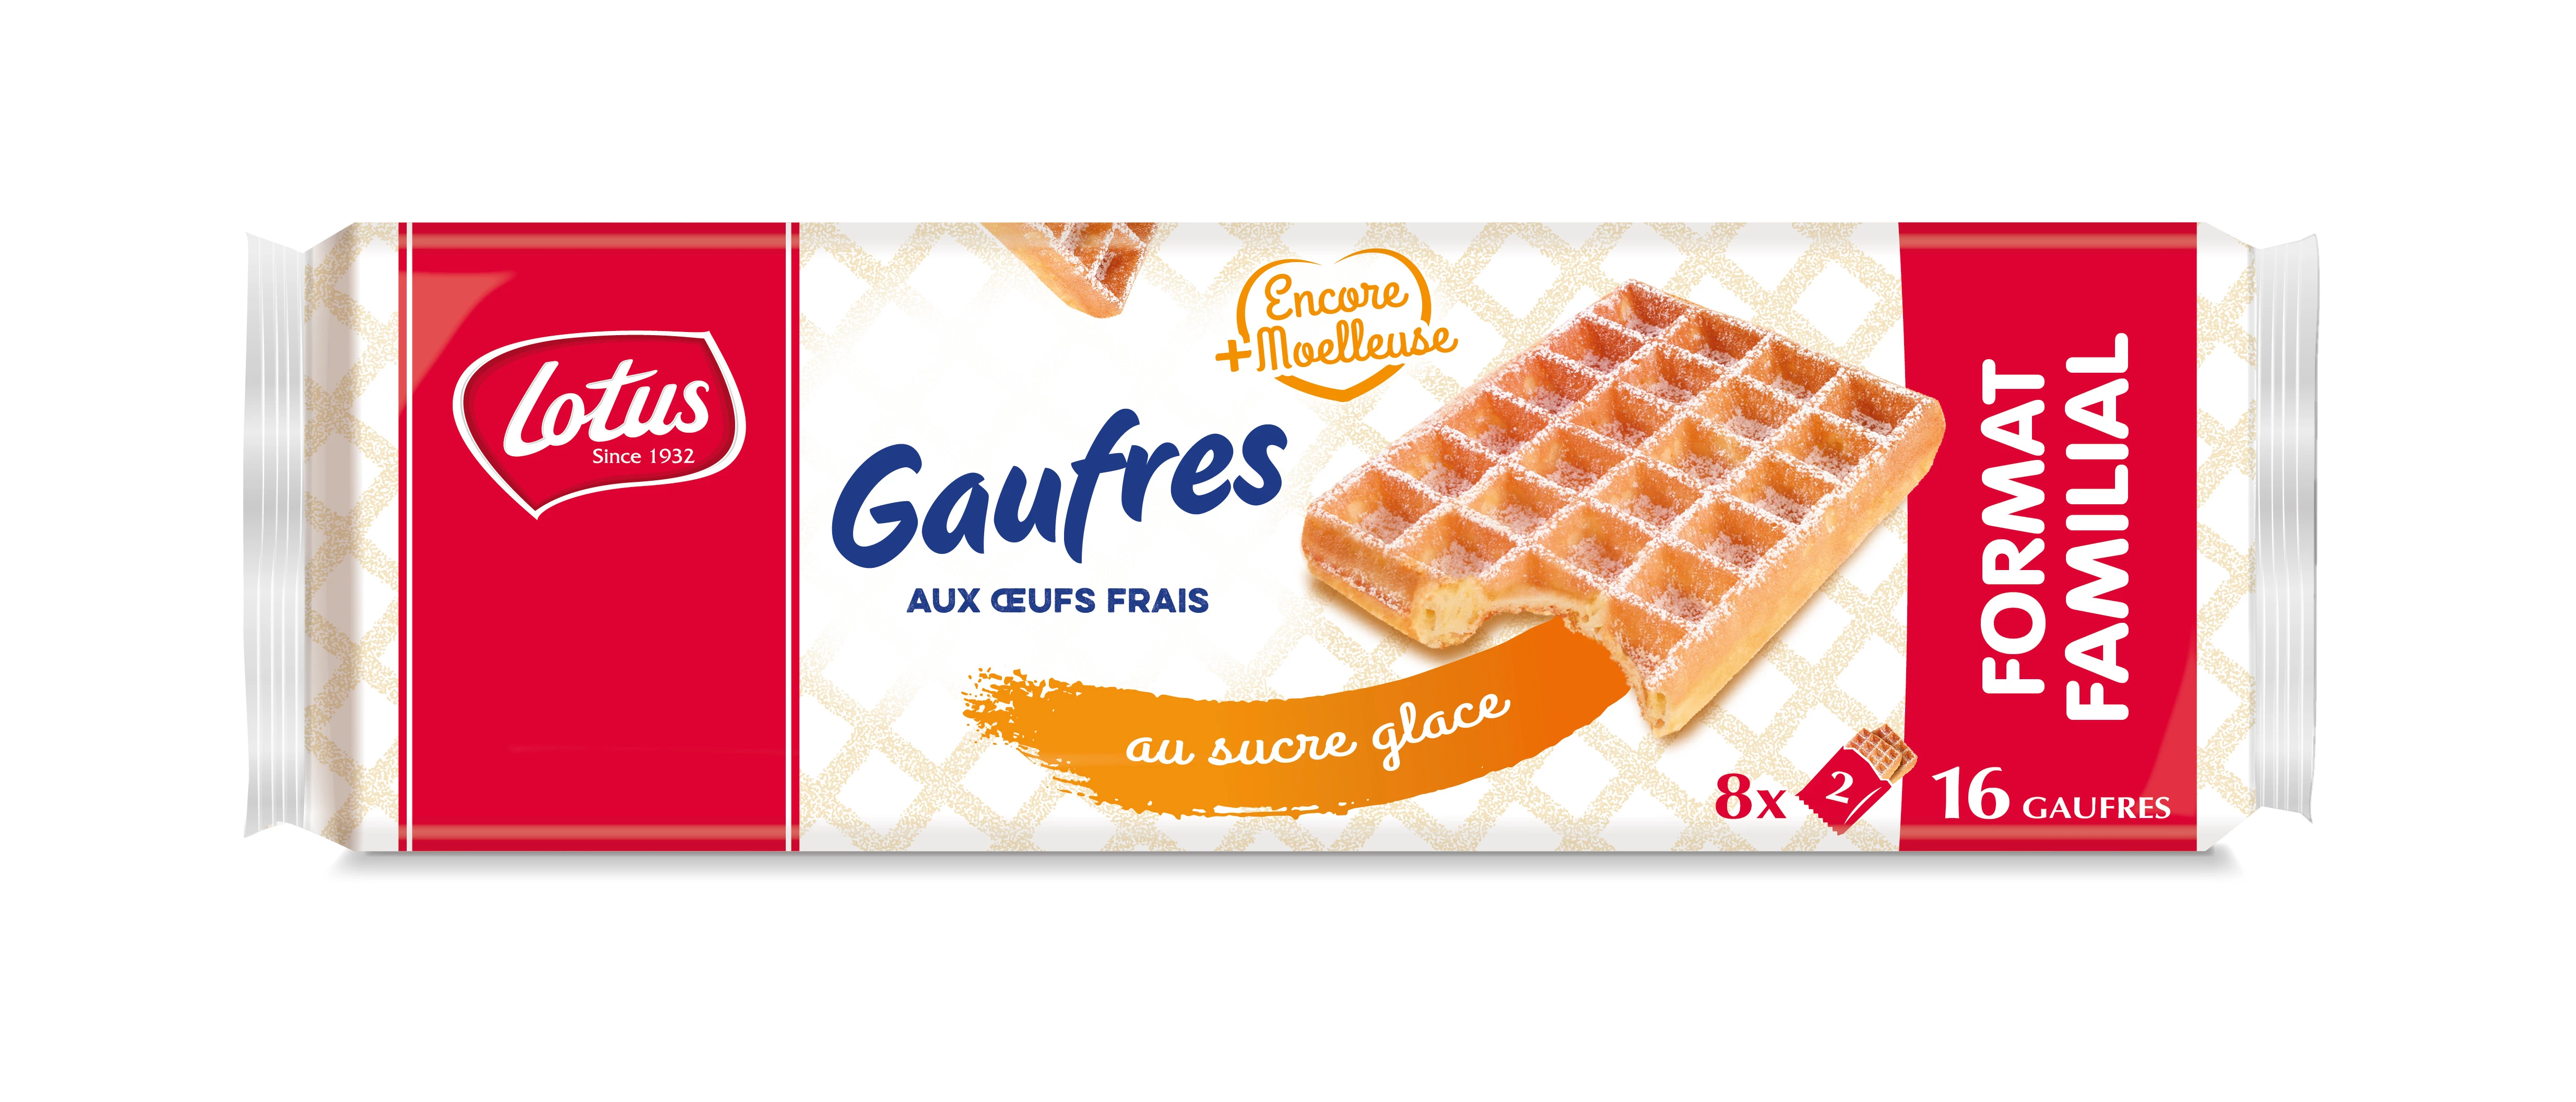 Gaufre Sucre Glace 371g - LOTUS